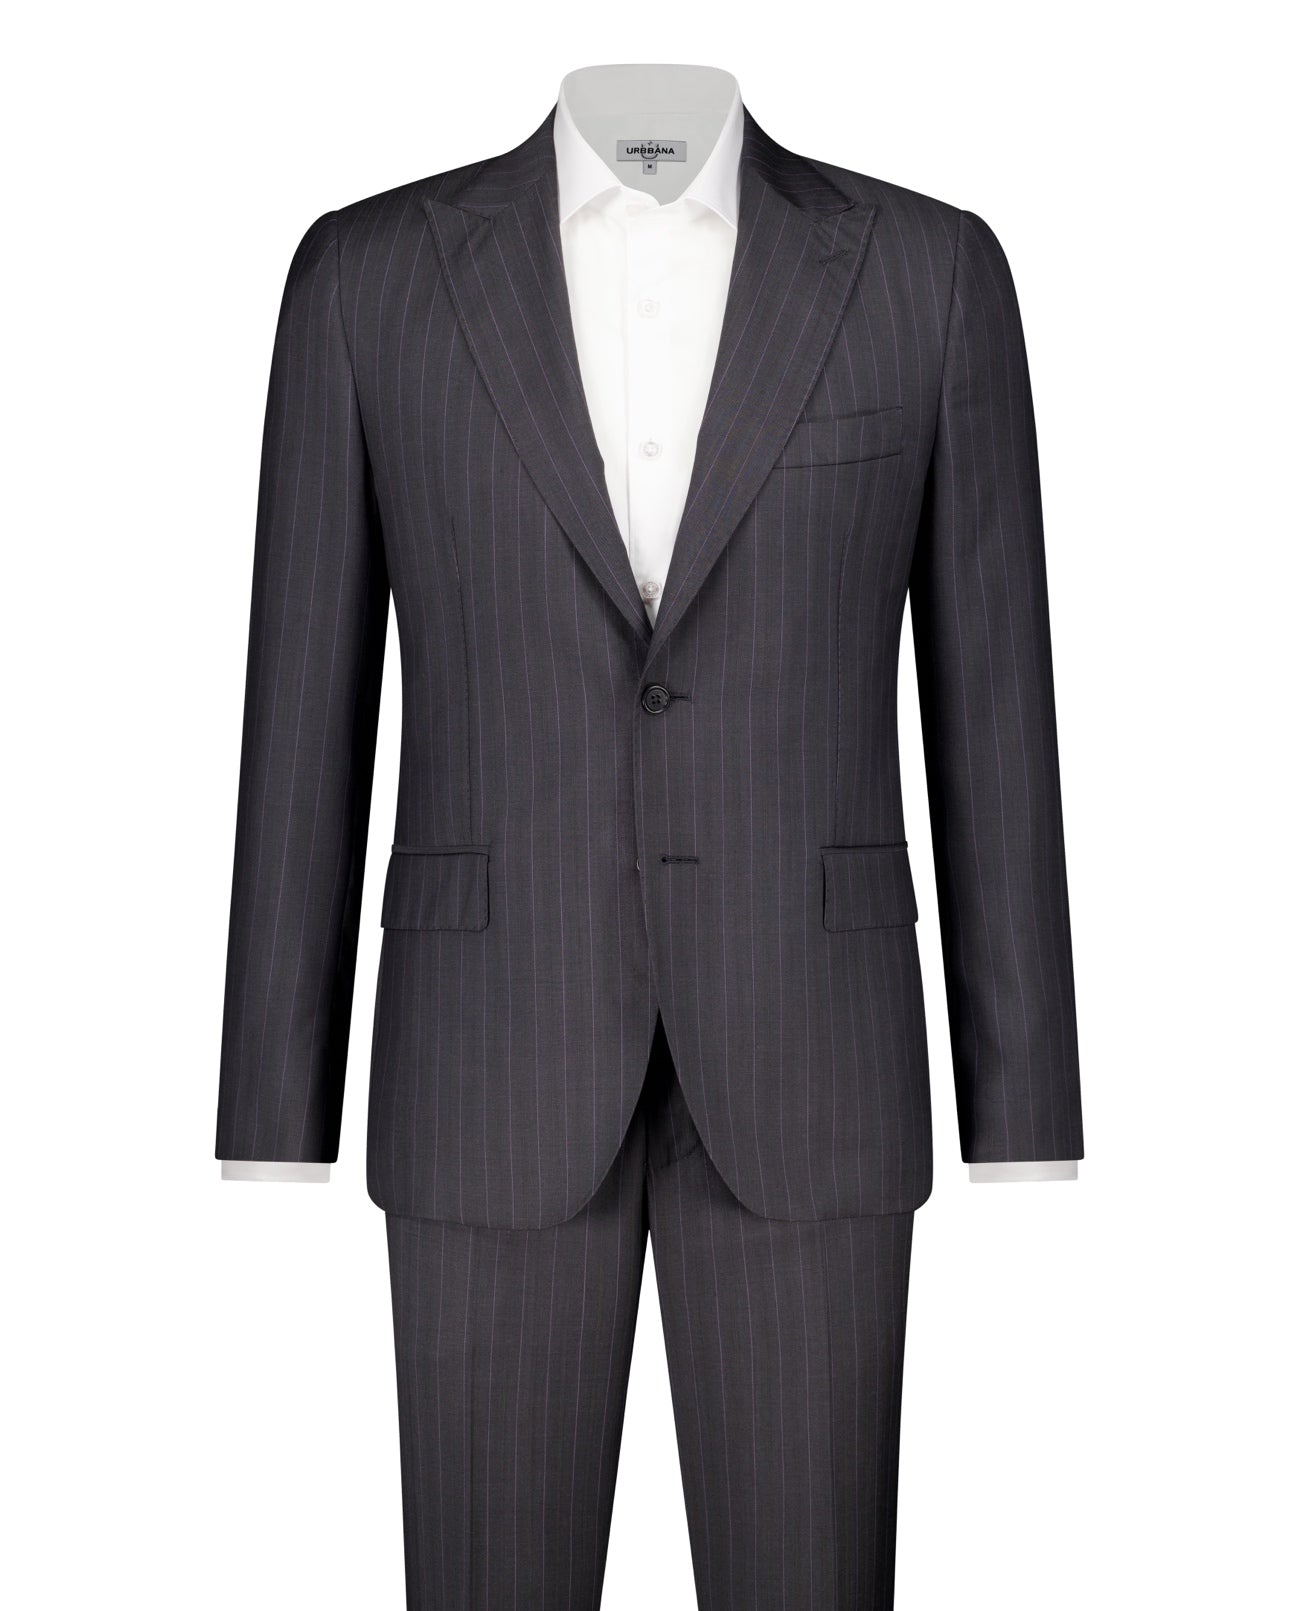 Wayne Zegna Cloth Suit - Black - Made in Italy